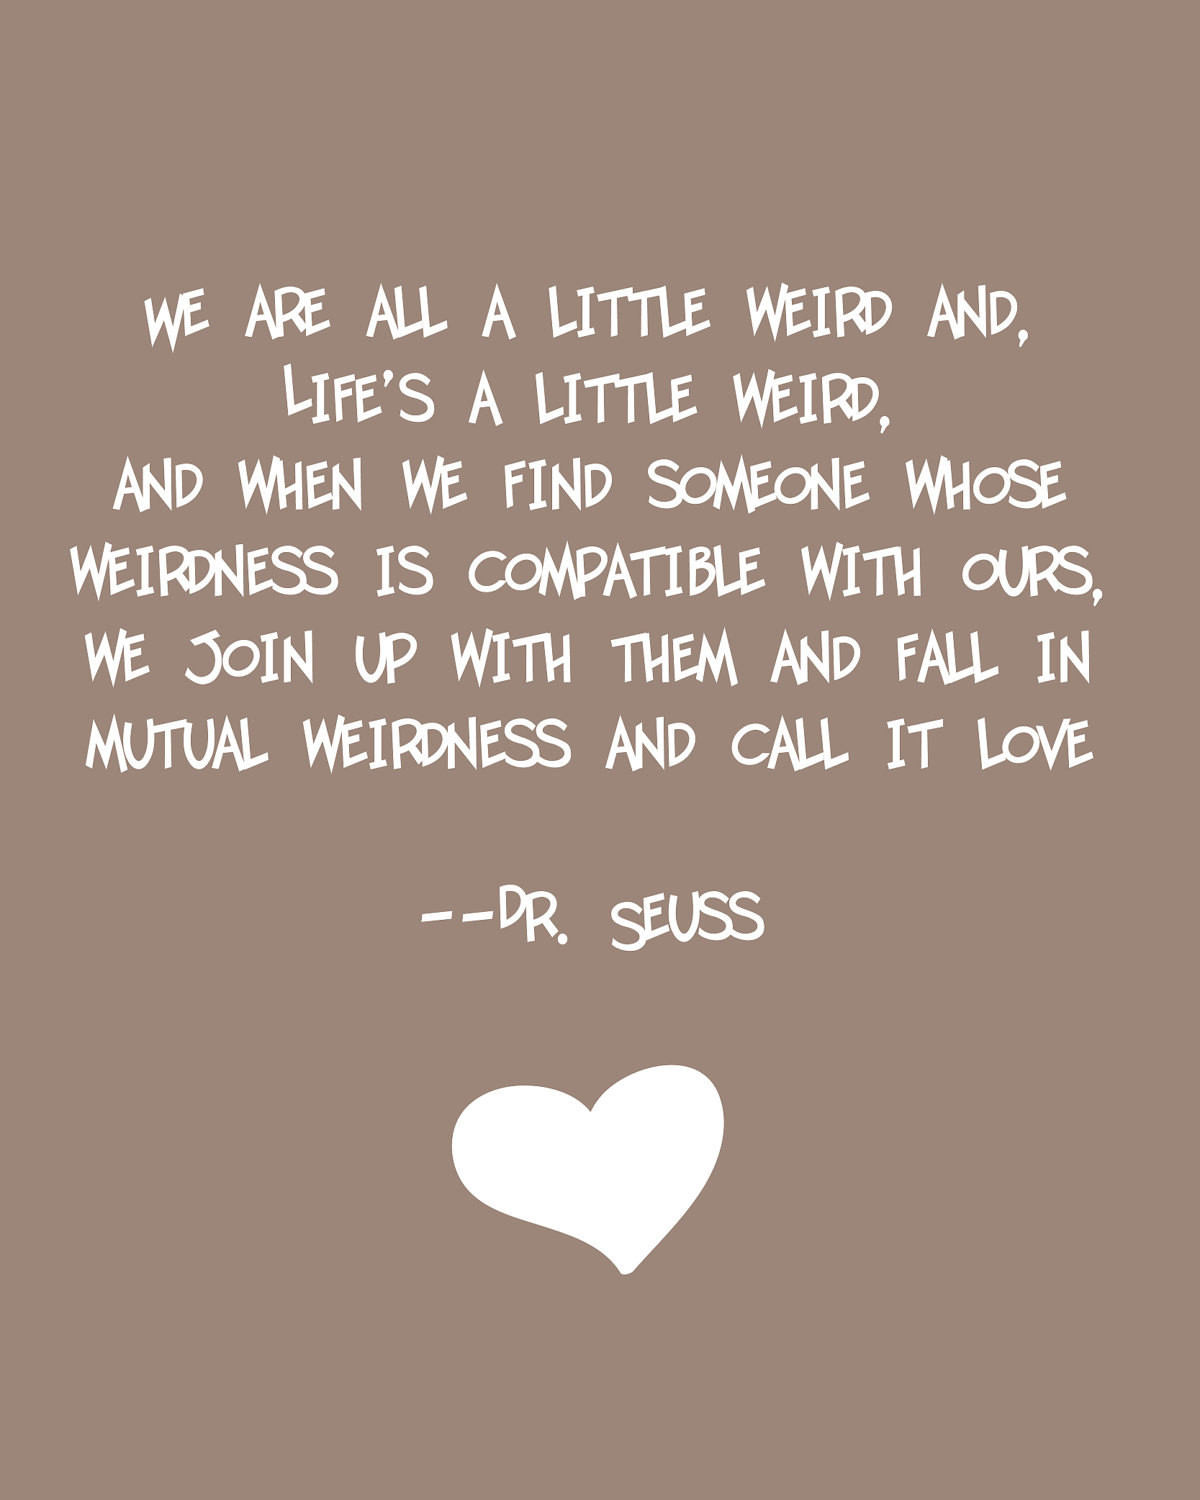 Love Quotes Dr.Seuss
 Dr Seuss Weird Love Quote Brown by ajsterrett on Etsy